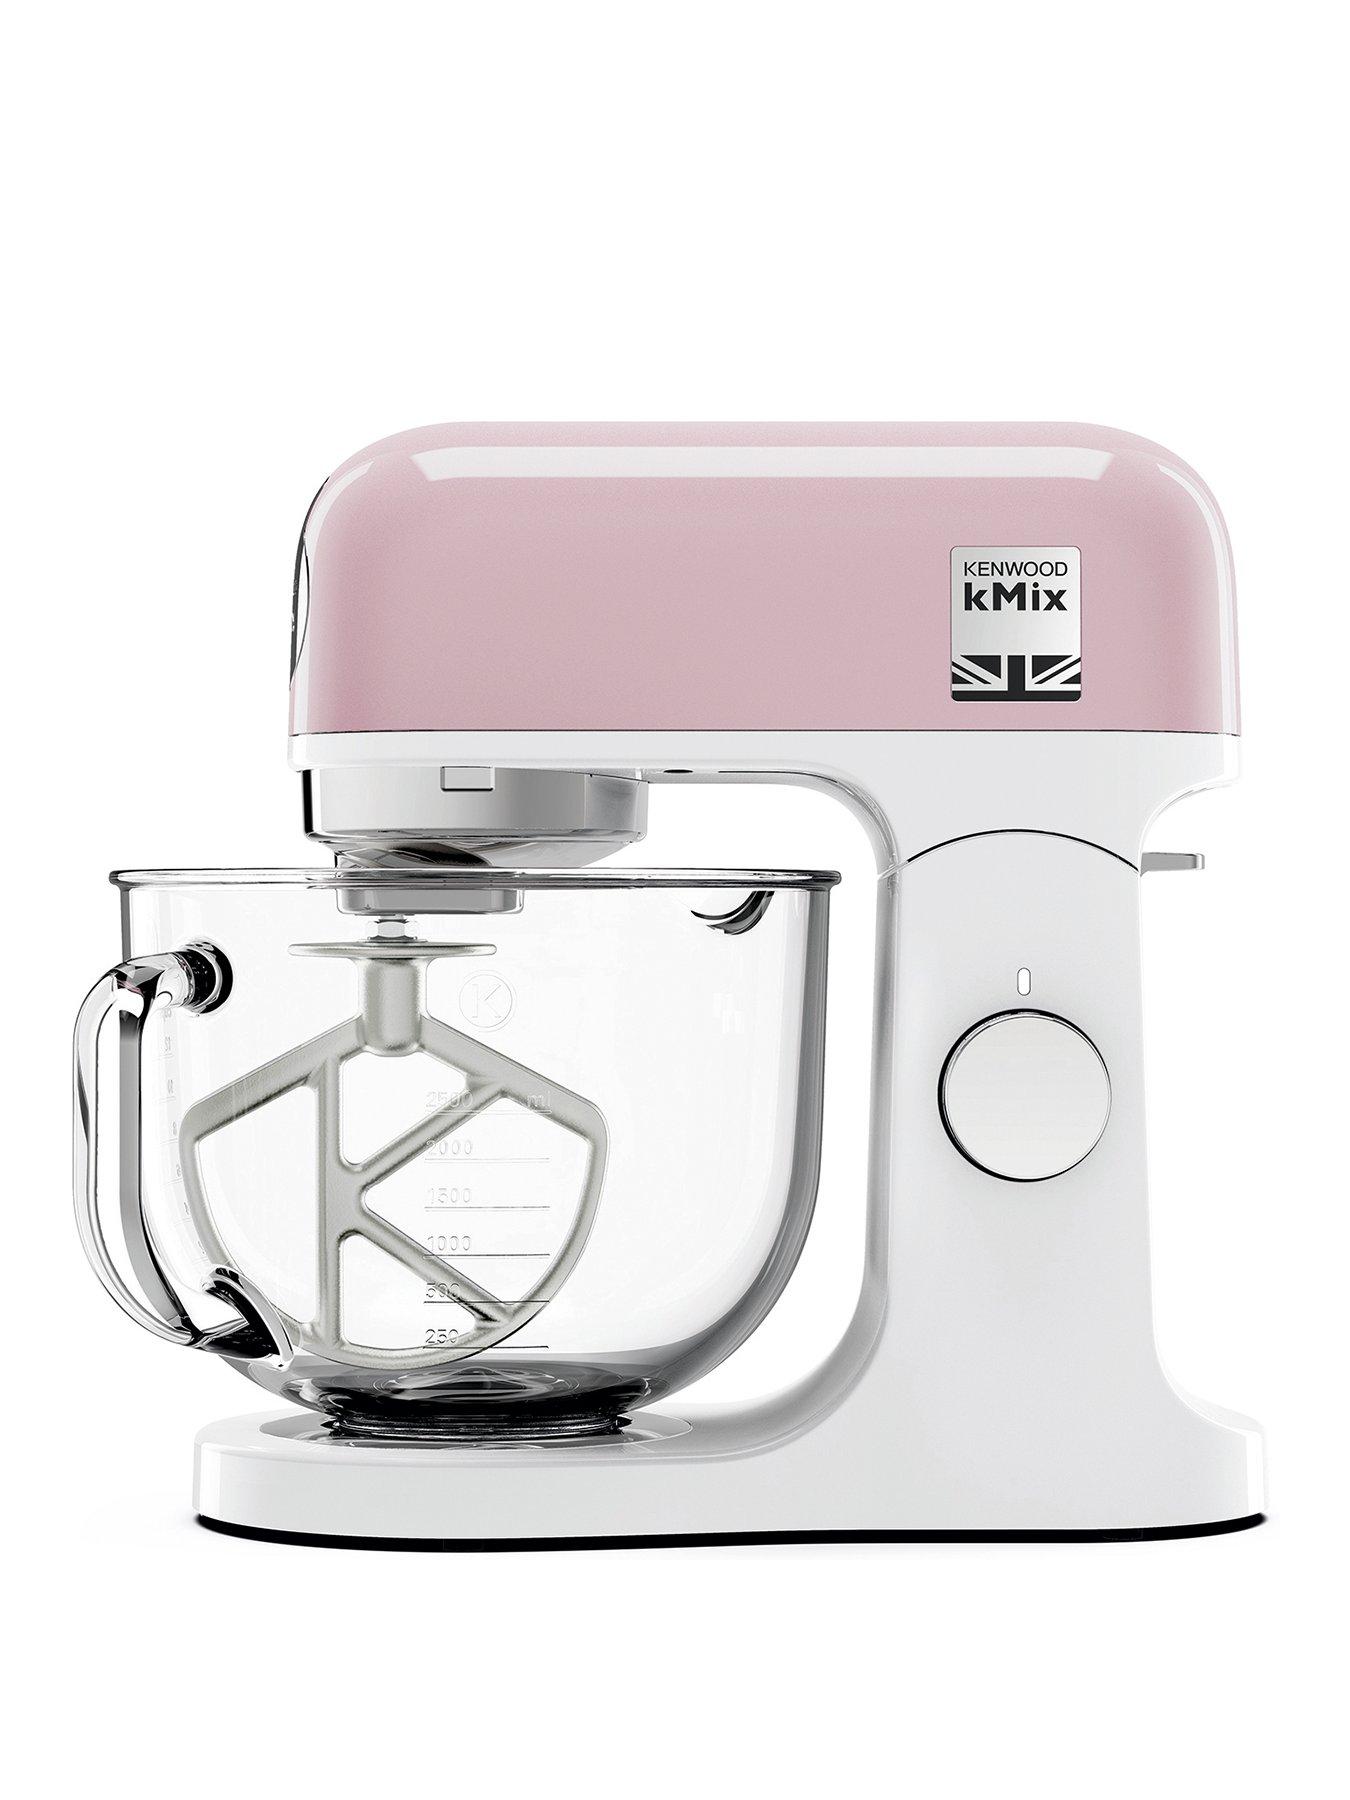 Kenwood Chef mixer: a timeless appliance for over 60 years - Consumer NZ